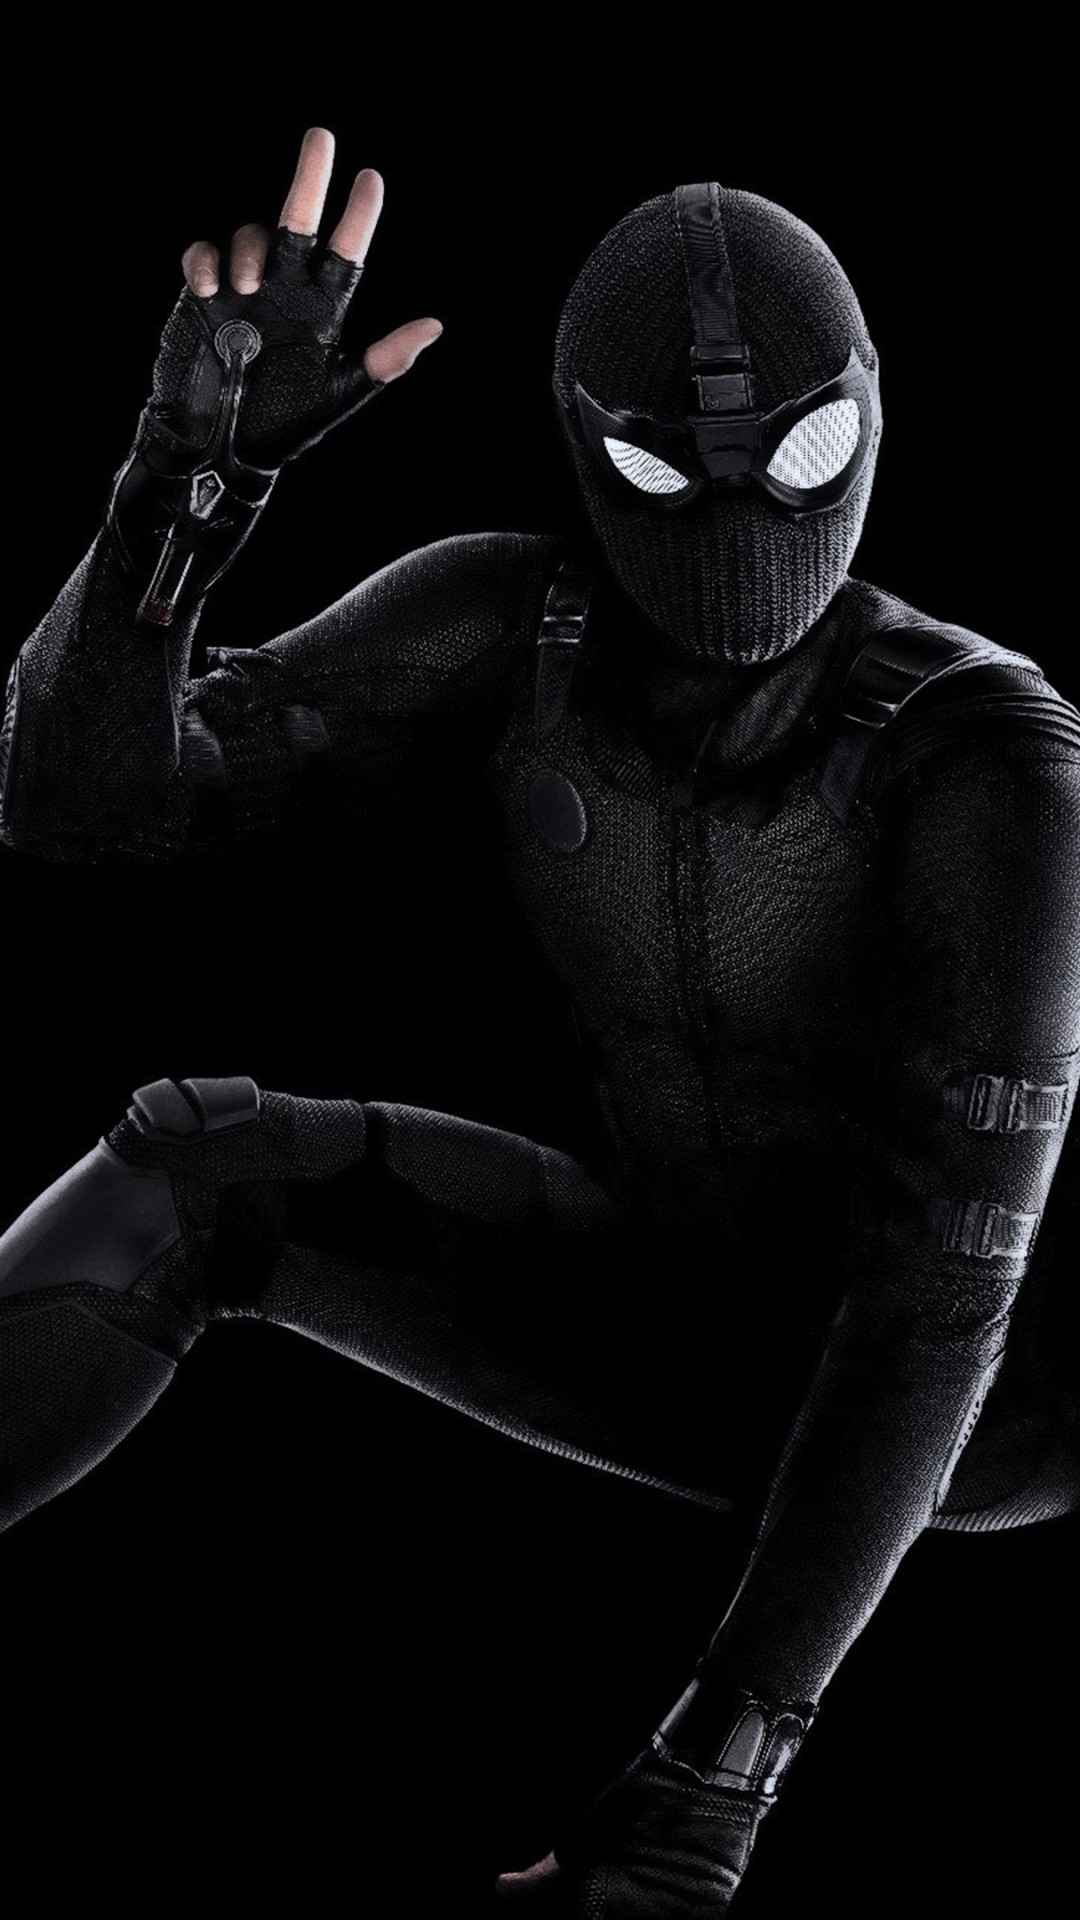 Download 1080x1920 Spider Man: Far From Home, Black Suit Wallpaper For IPhone IPhone 7 Plus, IPhone 6+, Sony Xperia Z, HTC One